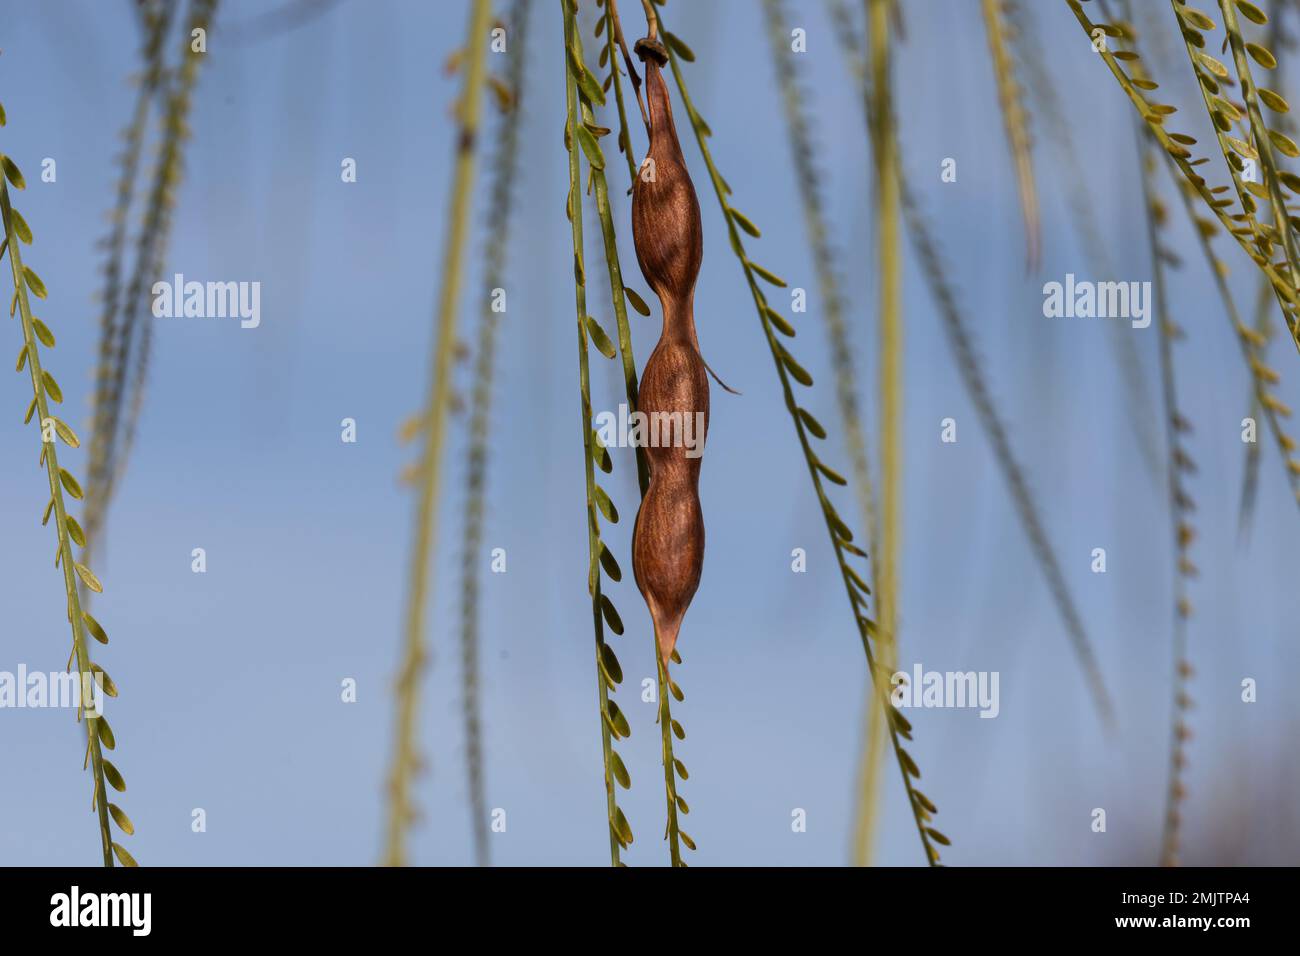 Seeds of Palo verde or Jerusalem thorn (Parkinsonia aculeata) hanging from a branch Stock Photo